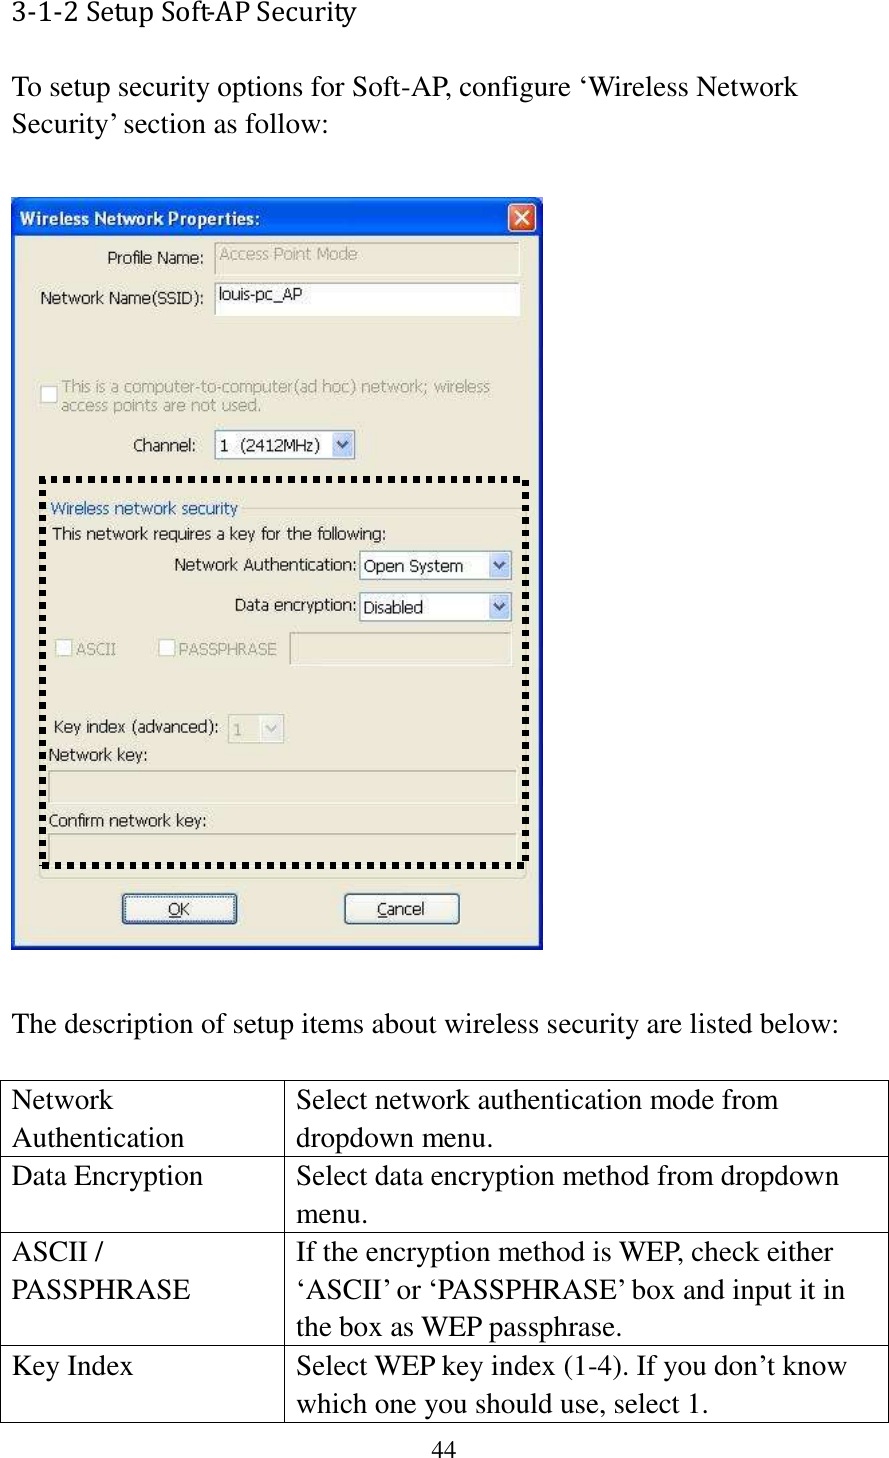 44  3-1-2 Setup Soft-AP Security  To setup security options for Soft-AP, configure ‘Wireless Network Security’ section as follow:    The description of setup items about wireless security are listed below:  Network Authentication Select network authentication mode from dropdown menu. Data Encryption Select data encryption method from dropdown menu. ASCII / PASSPHRASE If the encryption method is WEP, check either ‘ASCII’ or ‘PASSPHRASE’ box and input it in the box as WEP passphrase. Key Index Select WEP key index (1-4). If you don’t know which one you should use, select 1. 